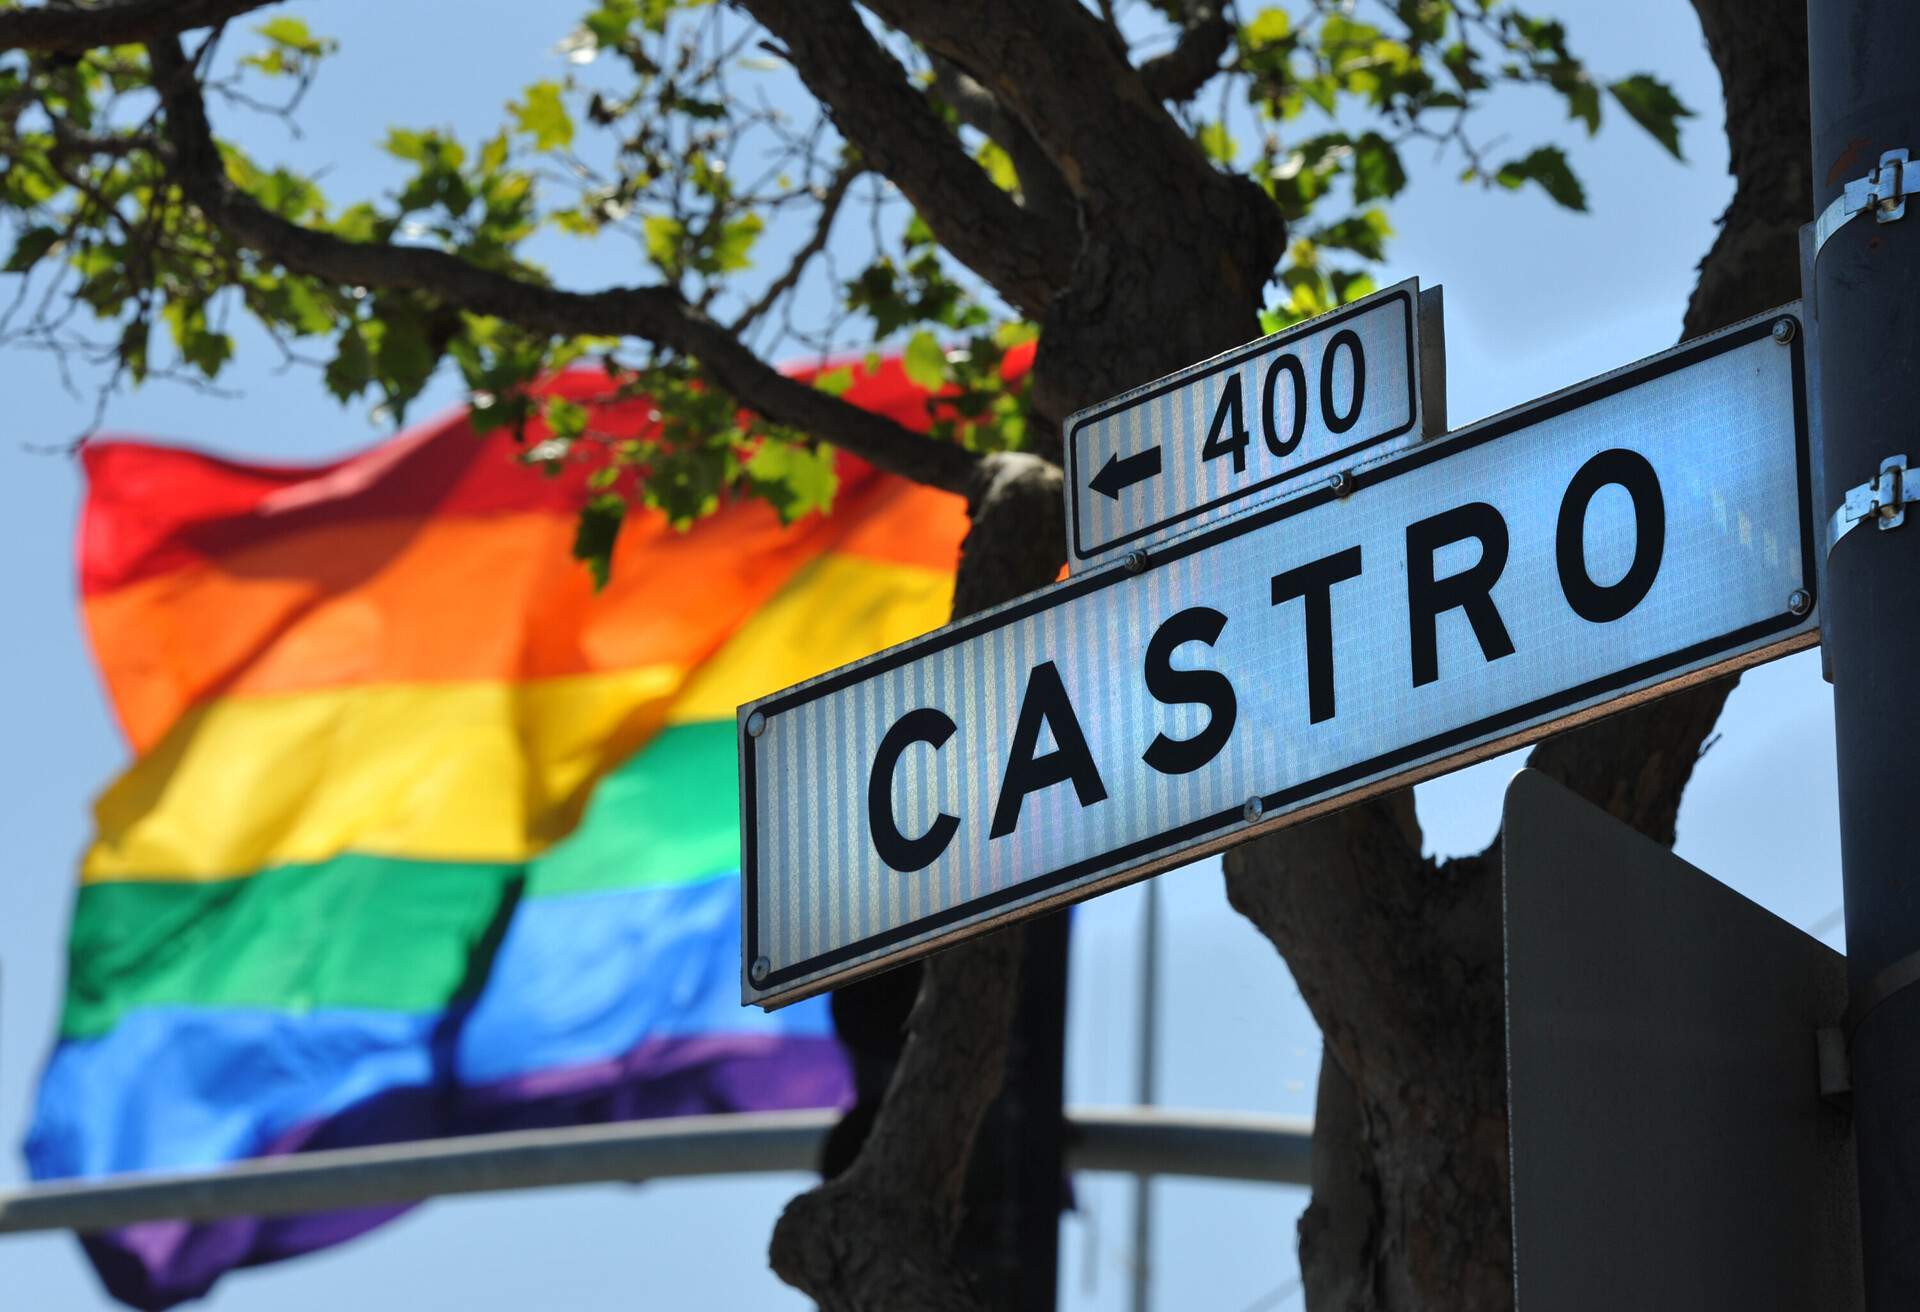 a street sign in San Francisco for the 'Castro' area which is a famous Gay and lesbian district. 